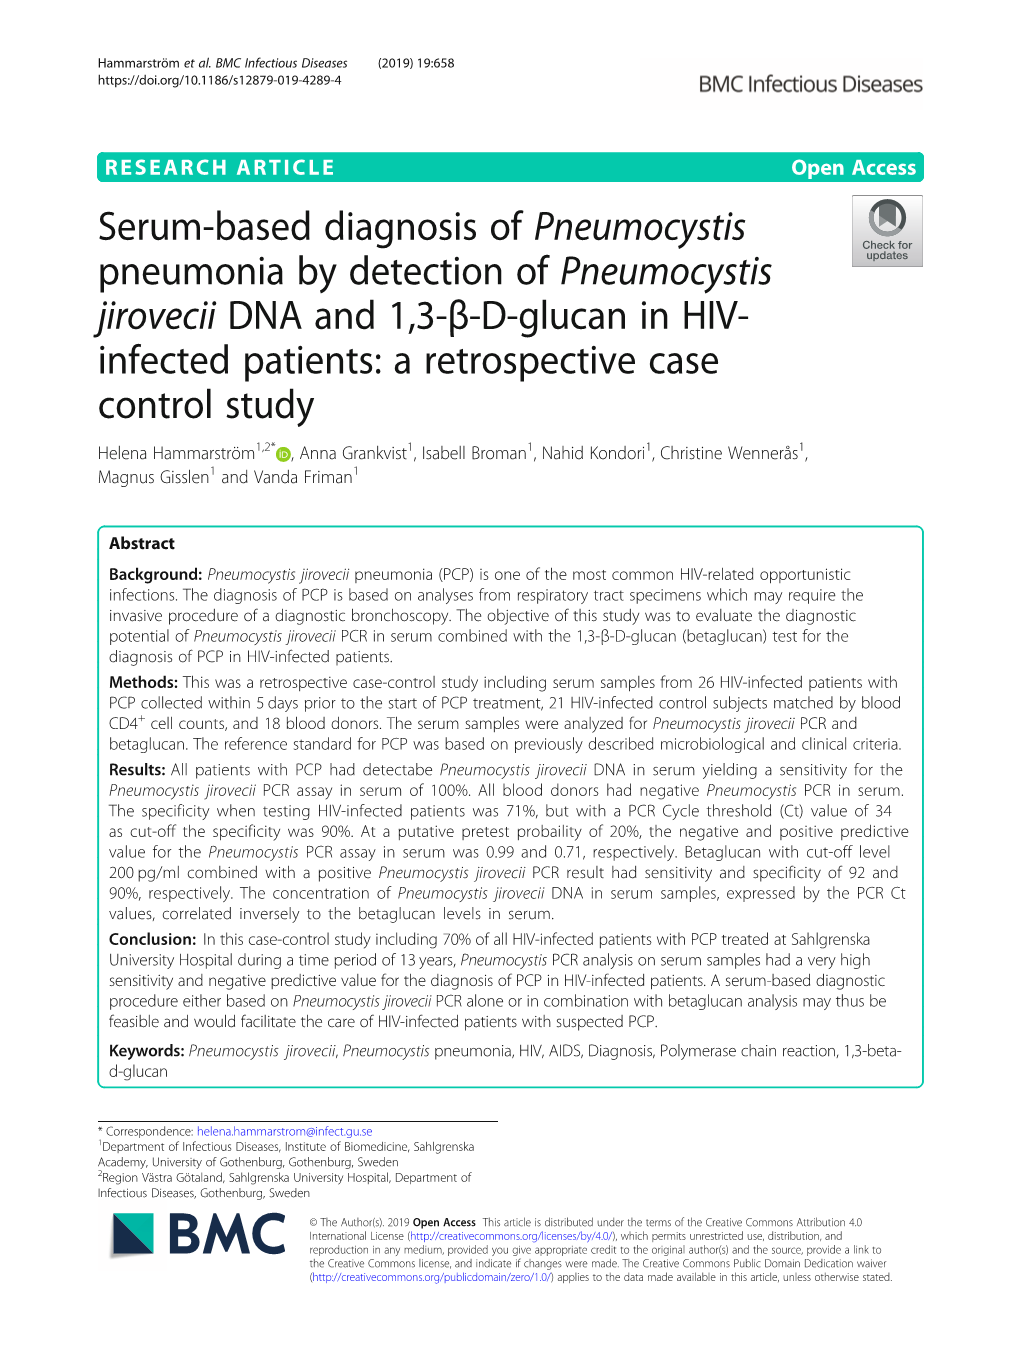 Serum-Based Diagnosis of Pneumocystis Pneumonia by Detection of Pneumocystis Jirovecii DNA and 1,3-Β-D-Glucan in HIV-Infected P